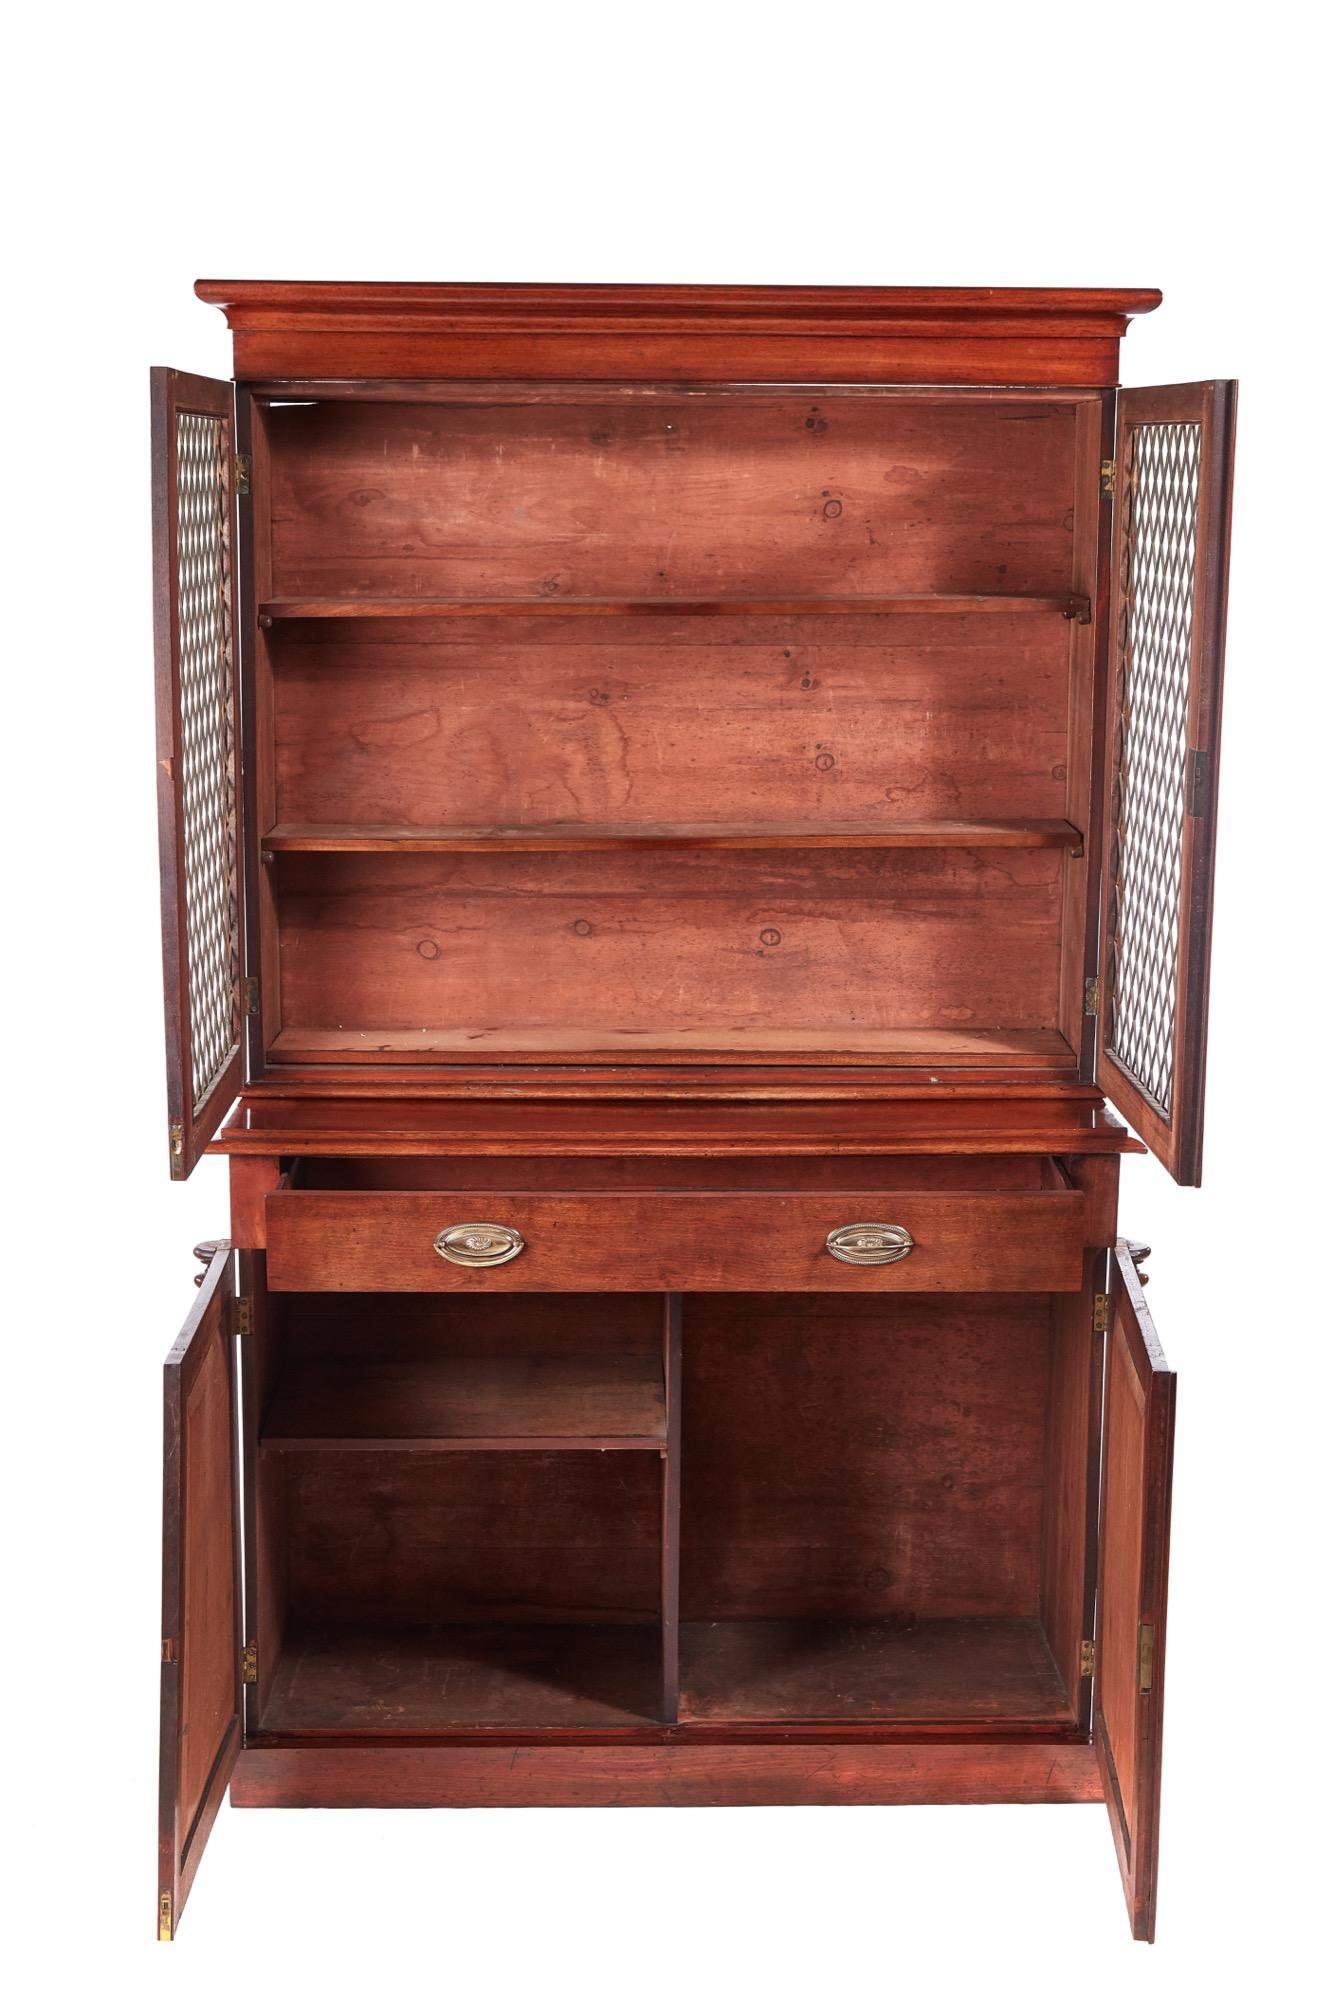 Quality antique William IV mahogany bookcase. The upper section having a shaped cornice over a pair of mahogany doors with brass grilles opening to reveal an interior with three adjustable shelves The base having one long drawer with brass handles